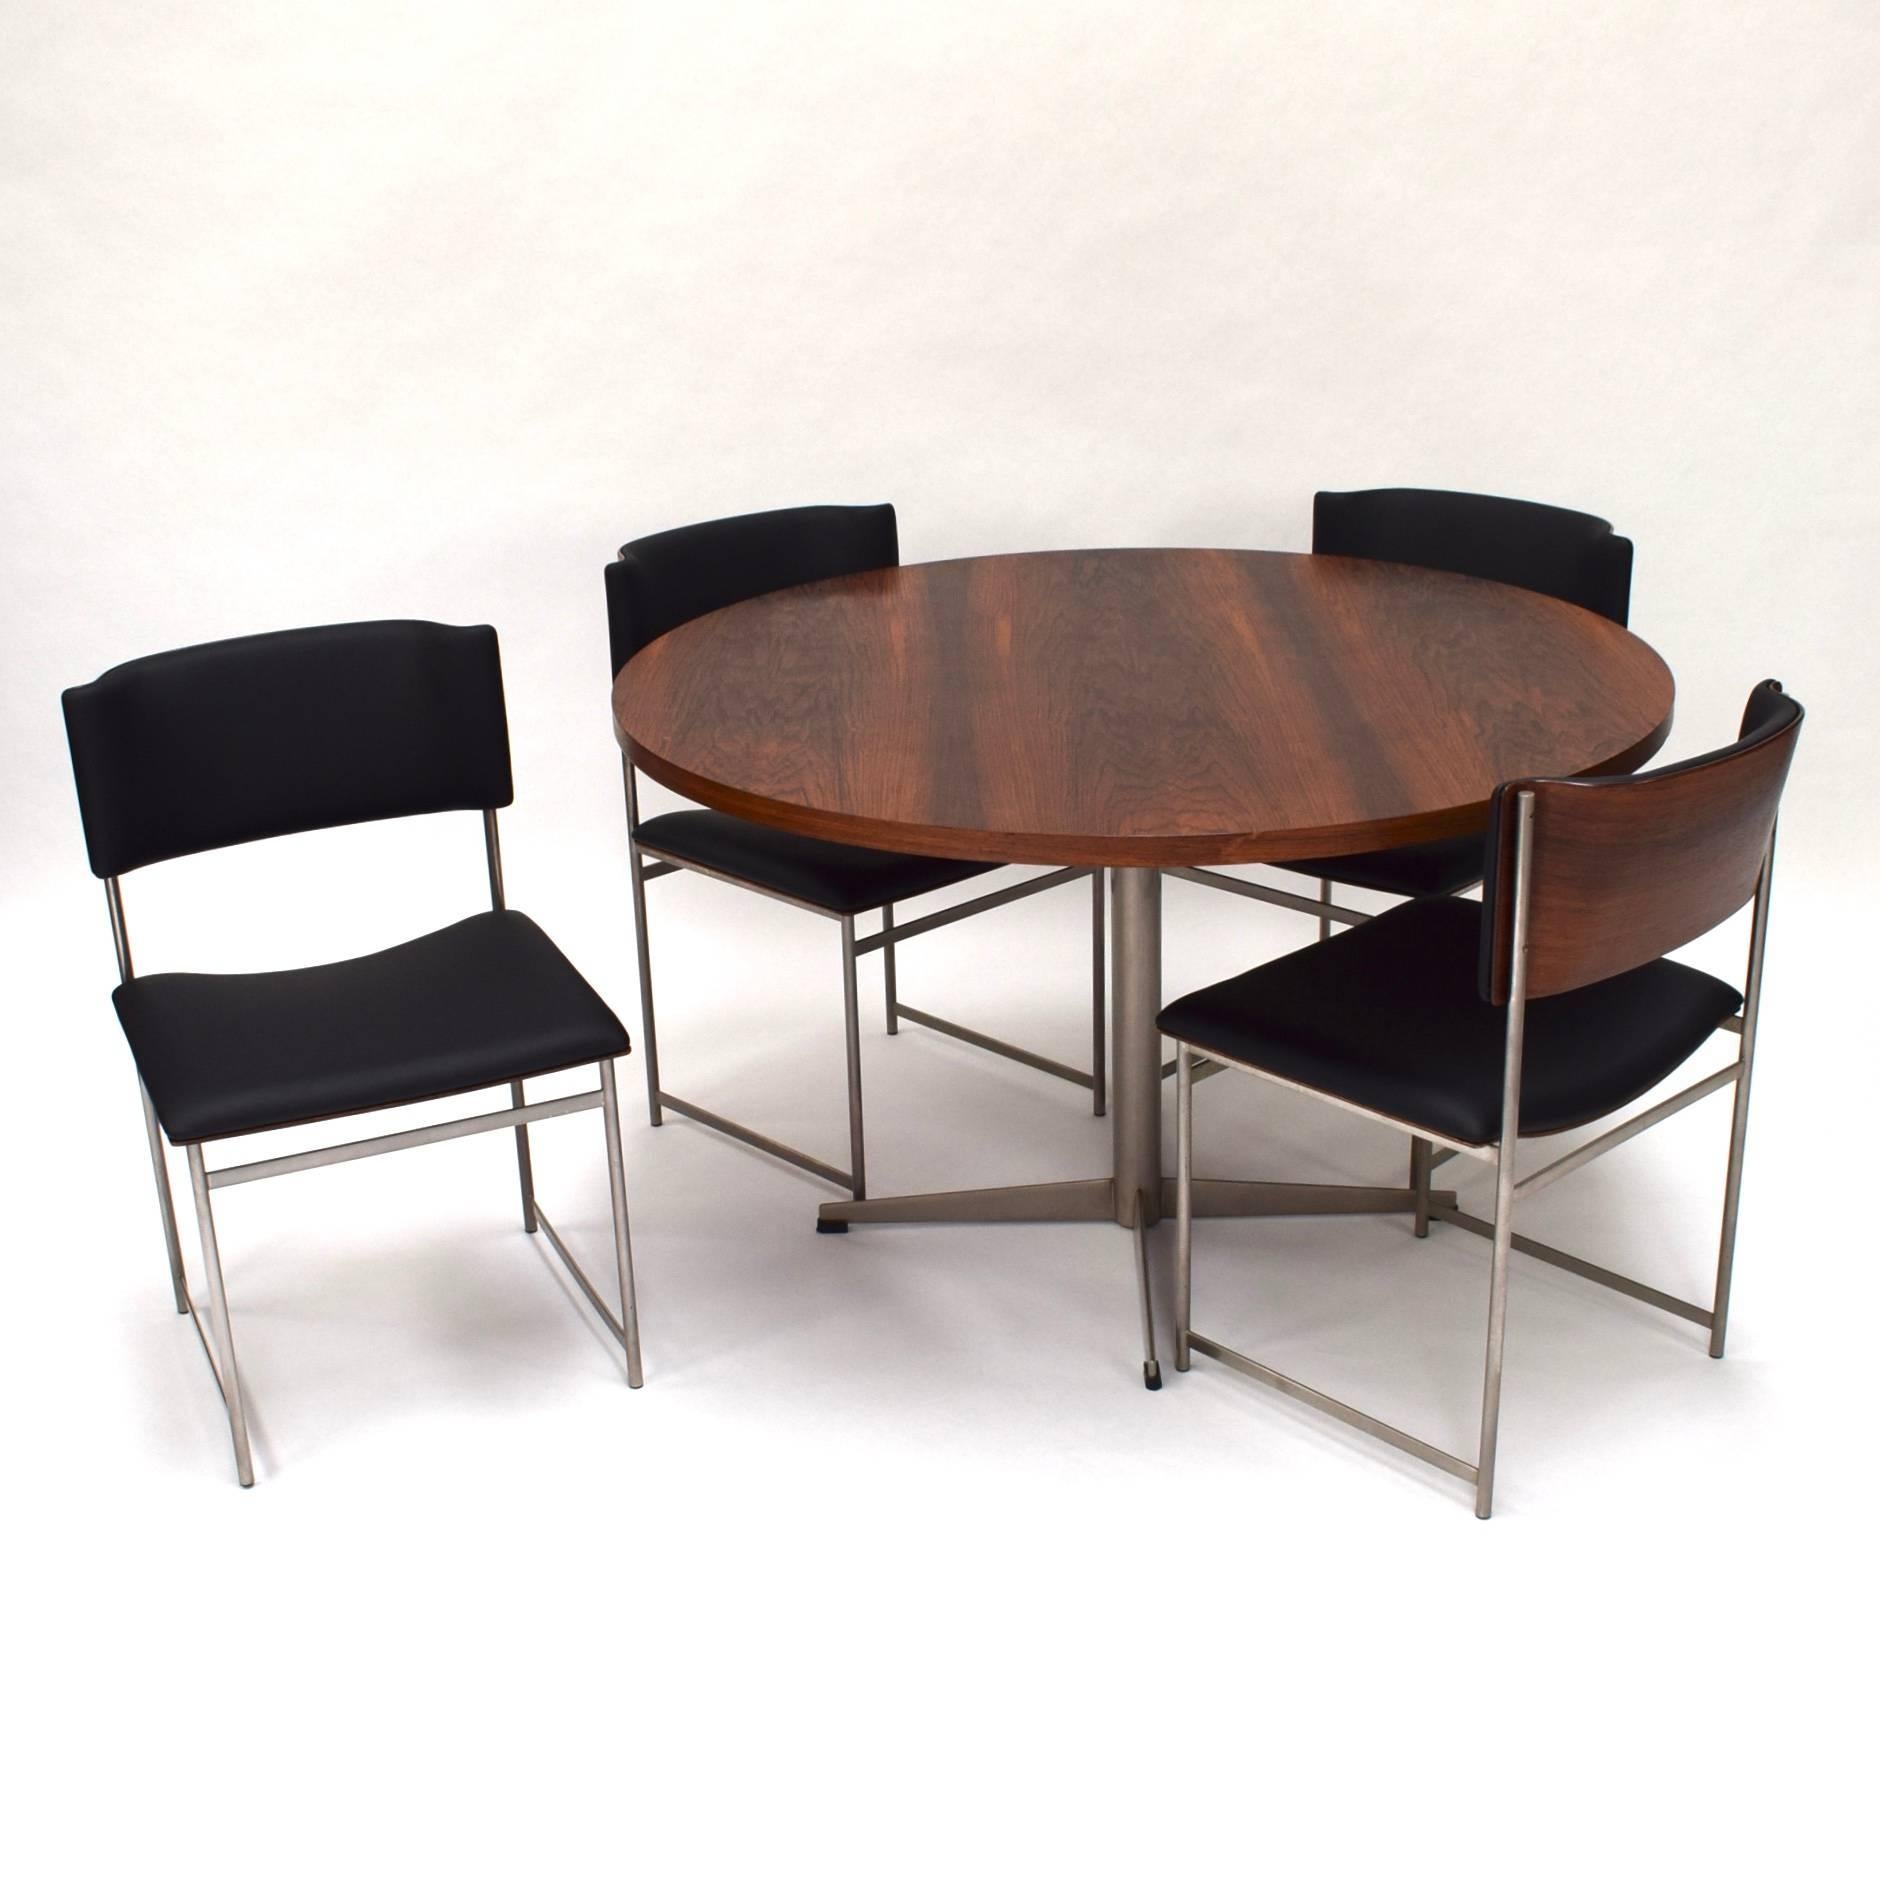 Mid-Century Modern Round Brazilian Rosewood Dining Set by Cees Braakman for Pastoe, circa 1950